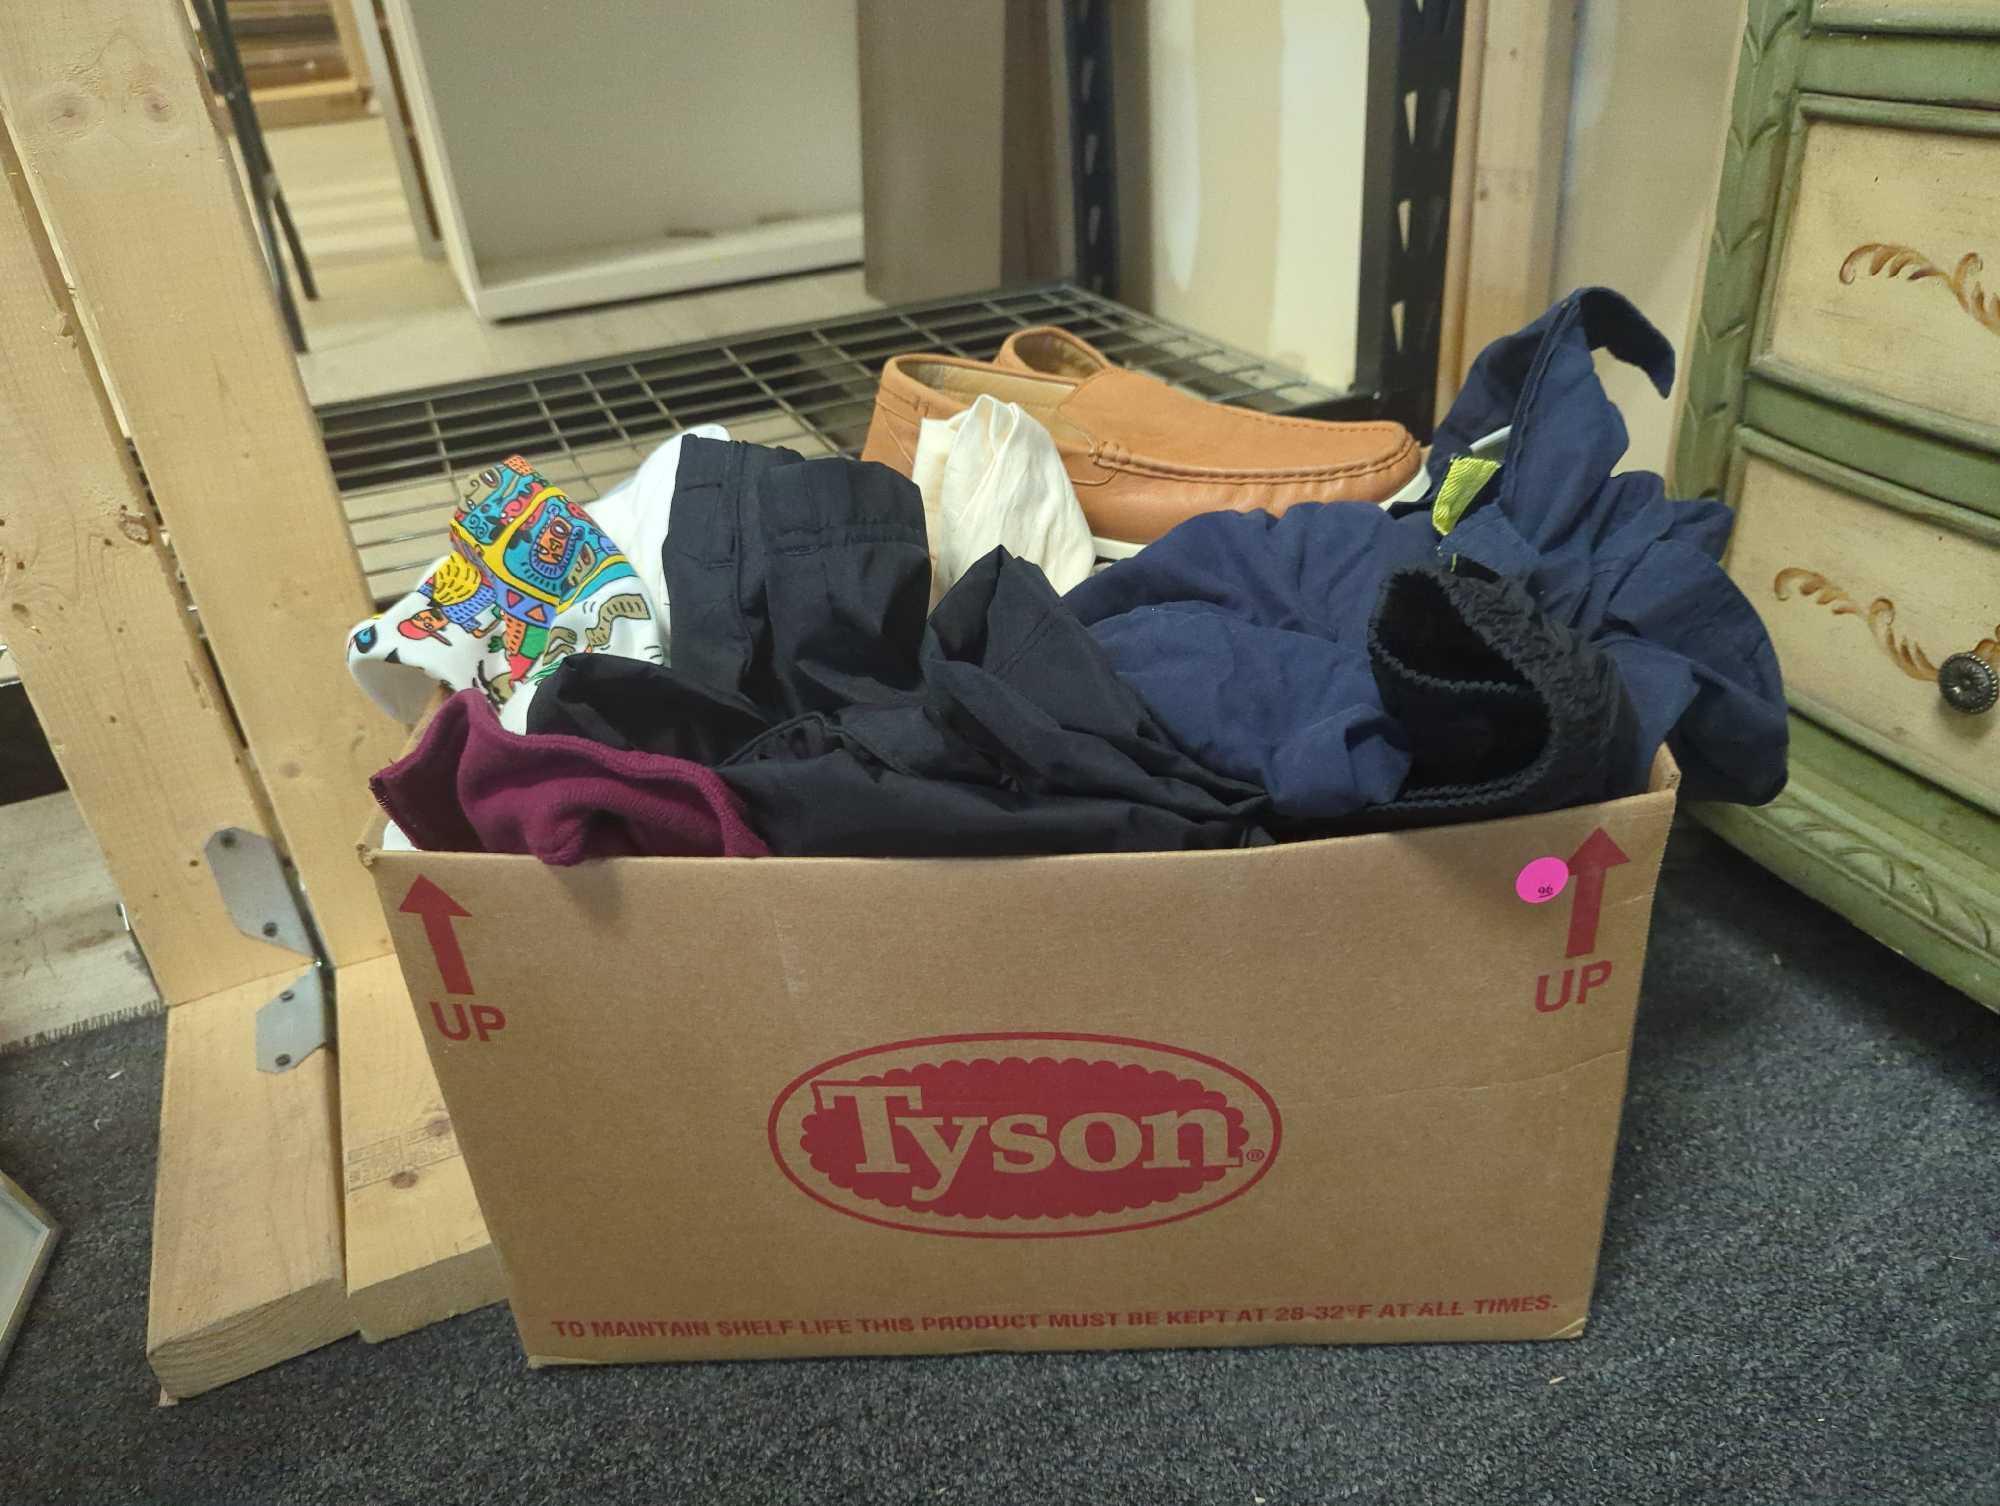 Box Lot of Assorted Clothing in Size Range XL to 2x, Includes Shirts, Pullovers, Pants, Underwear